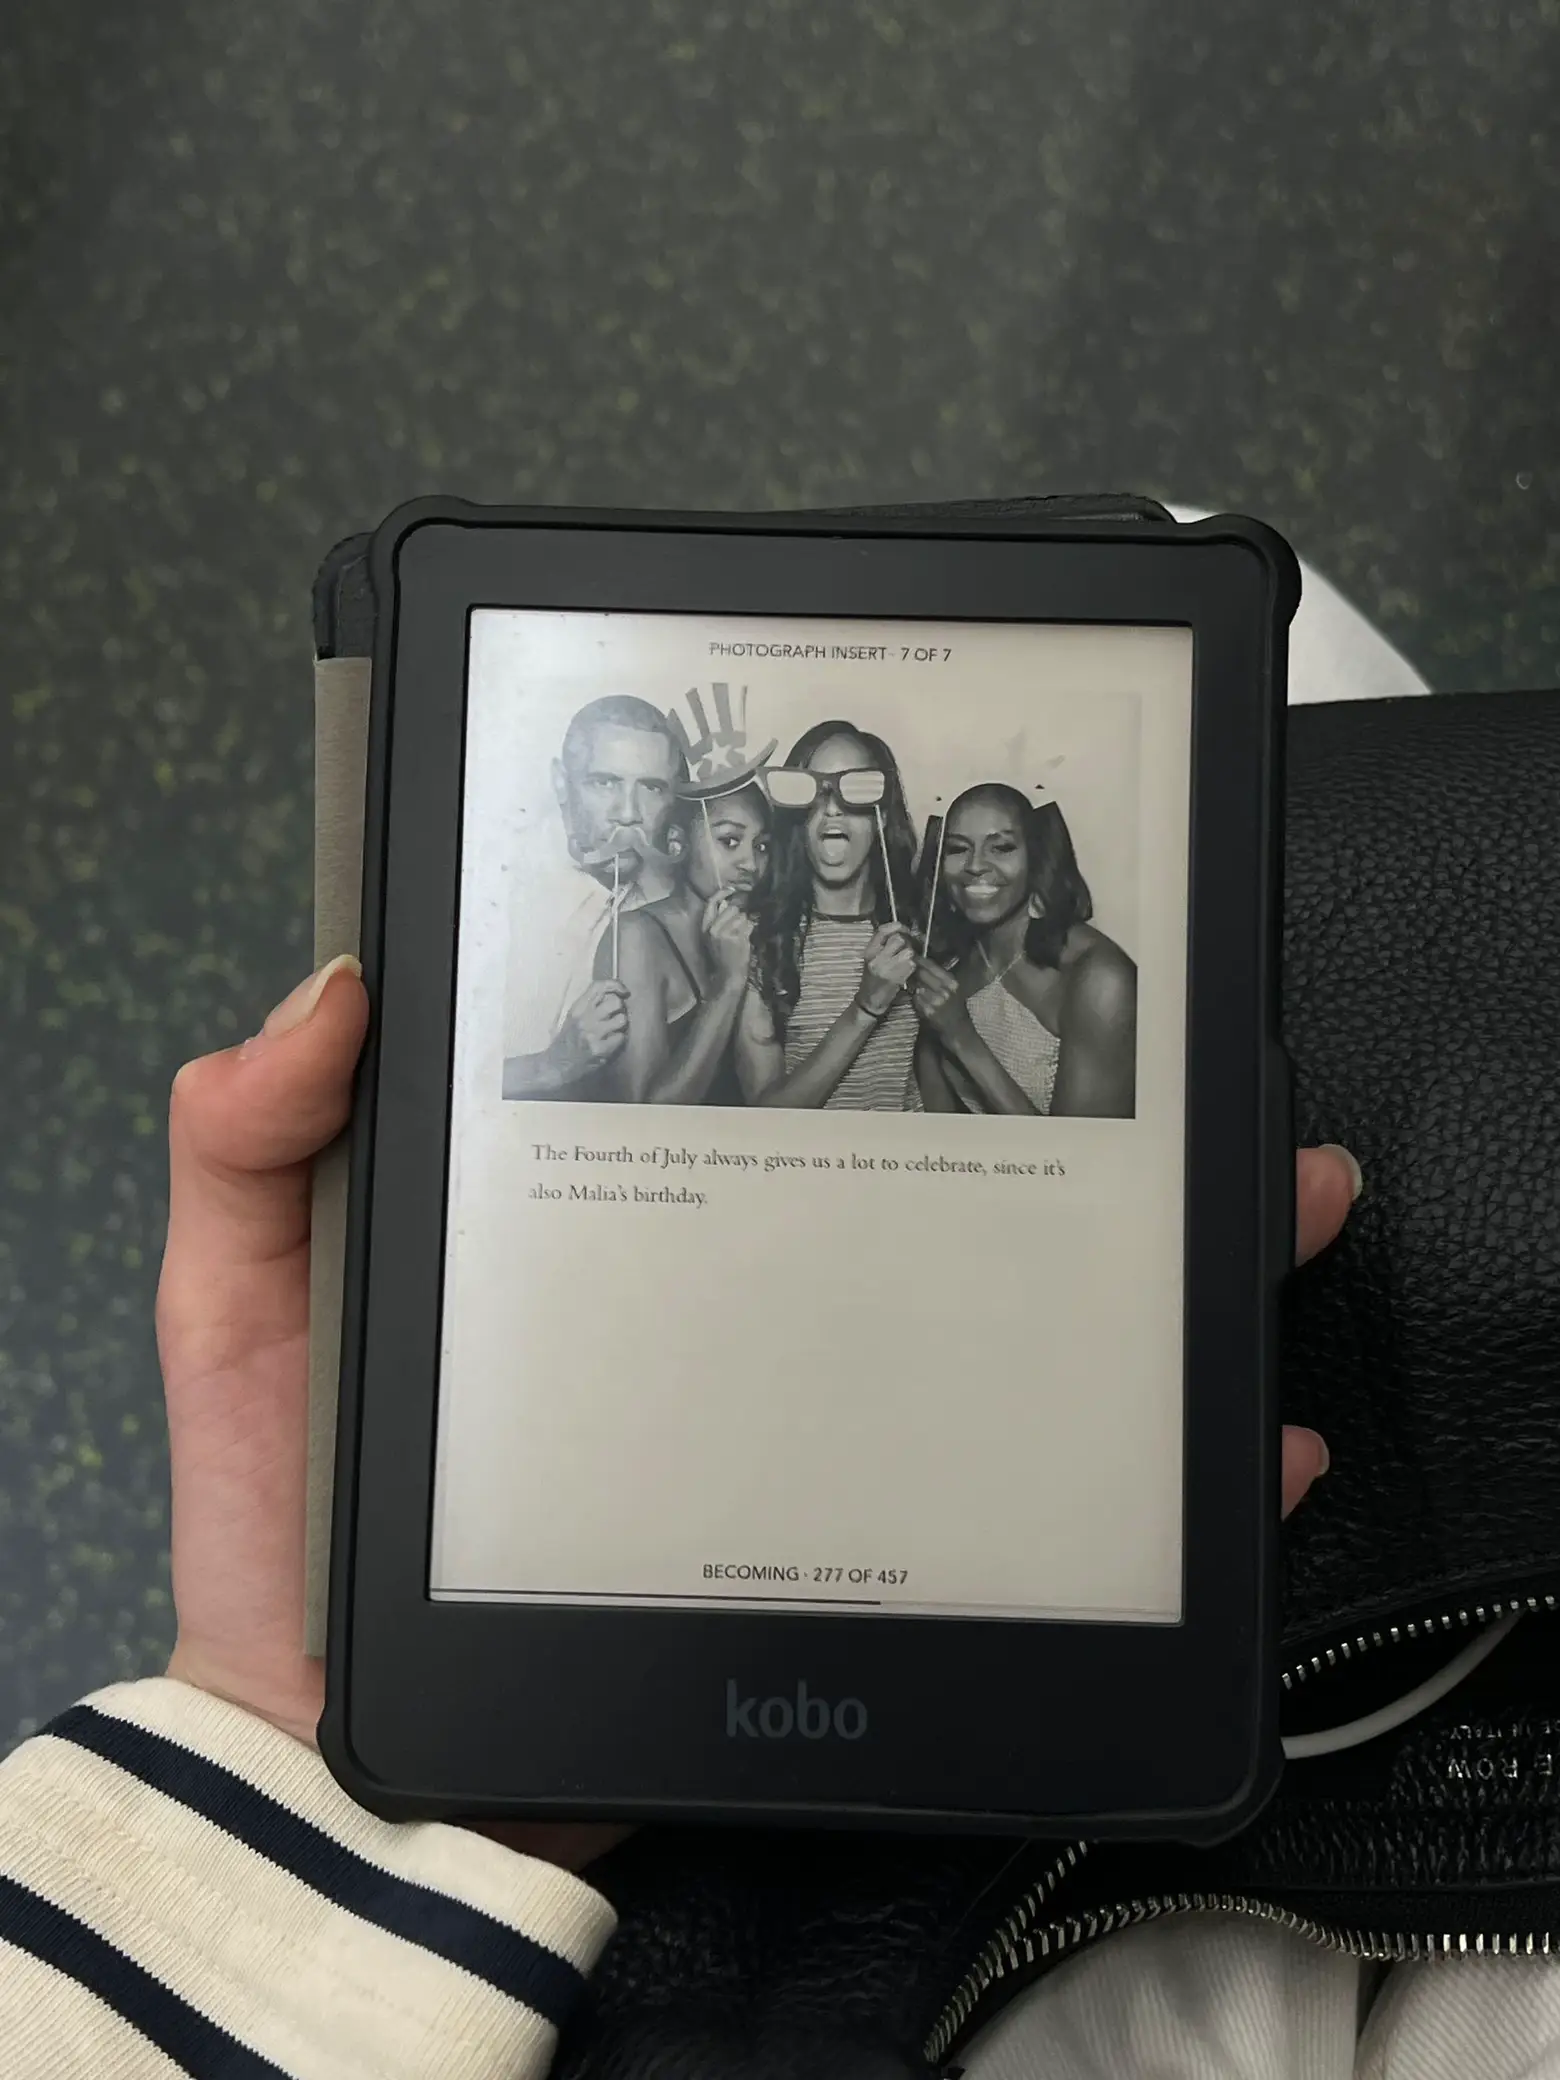 Why you should get yourself a Kobo!, Gallery posted by Shh.liu